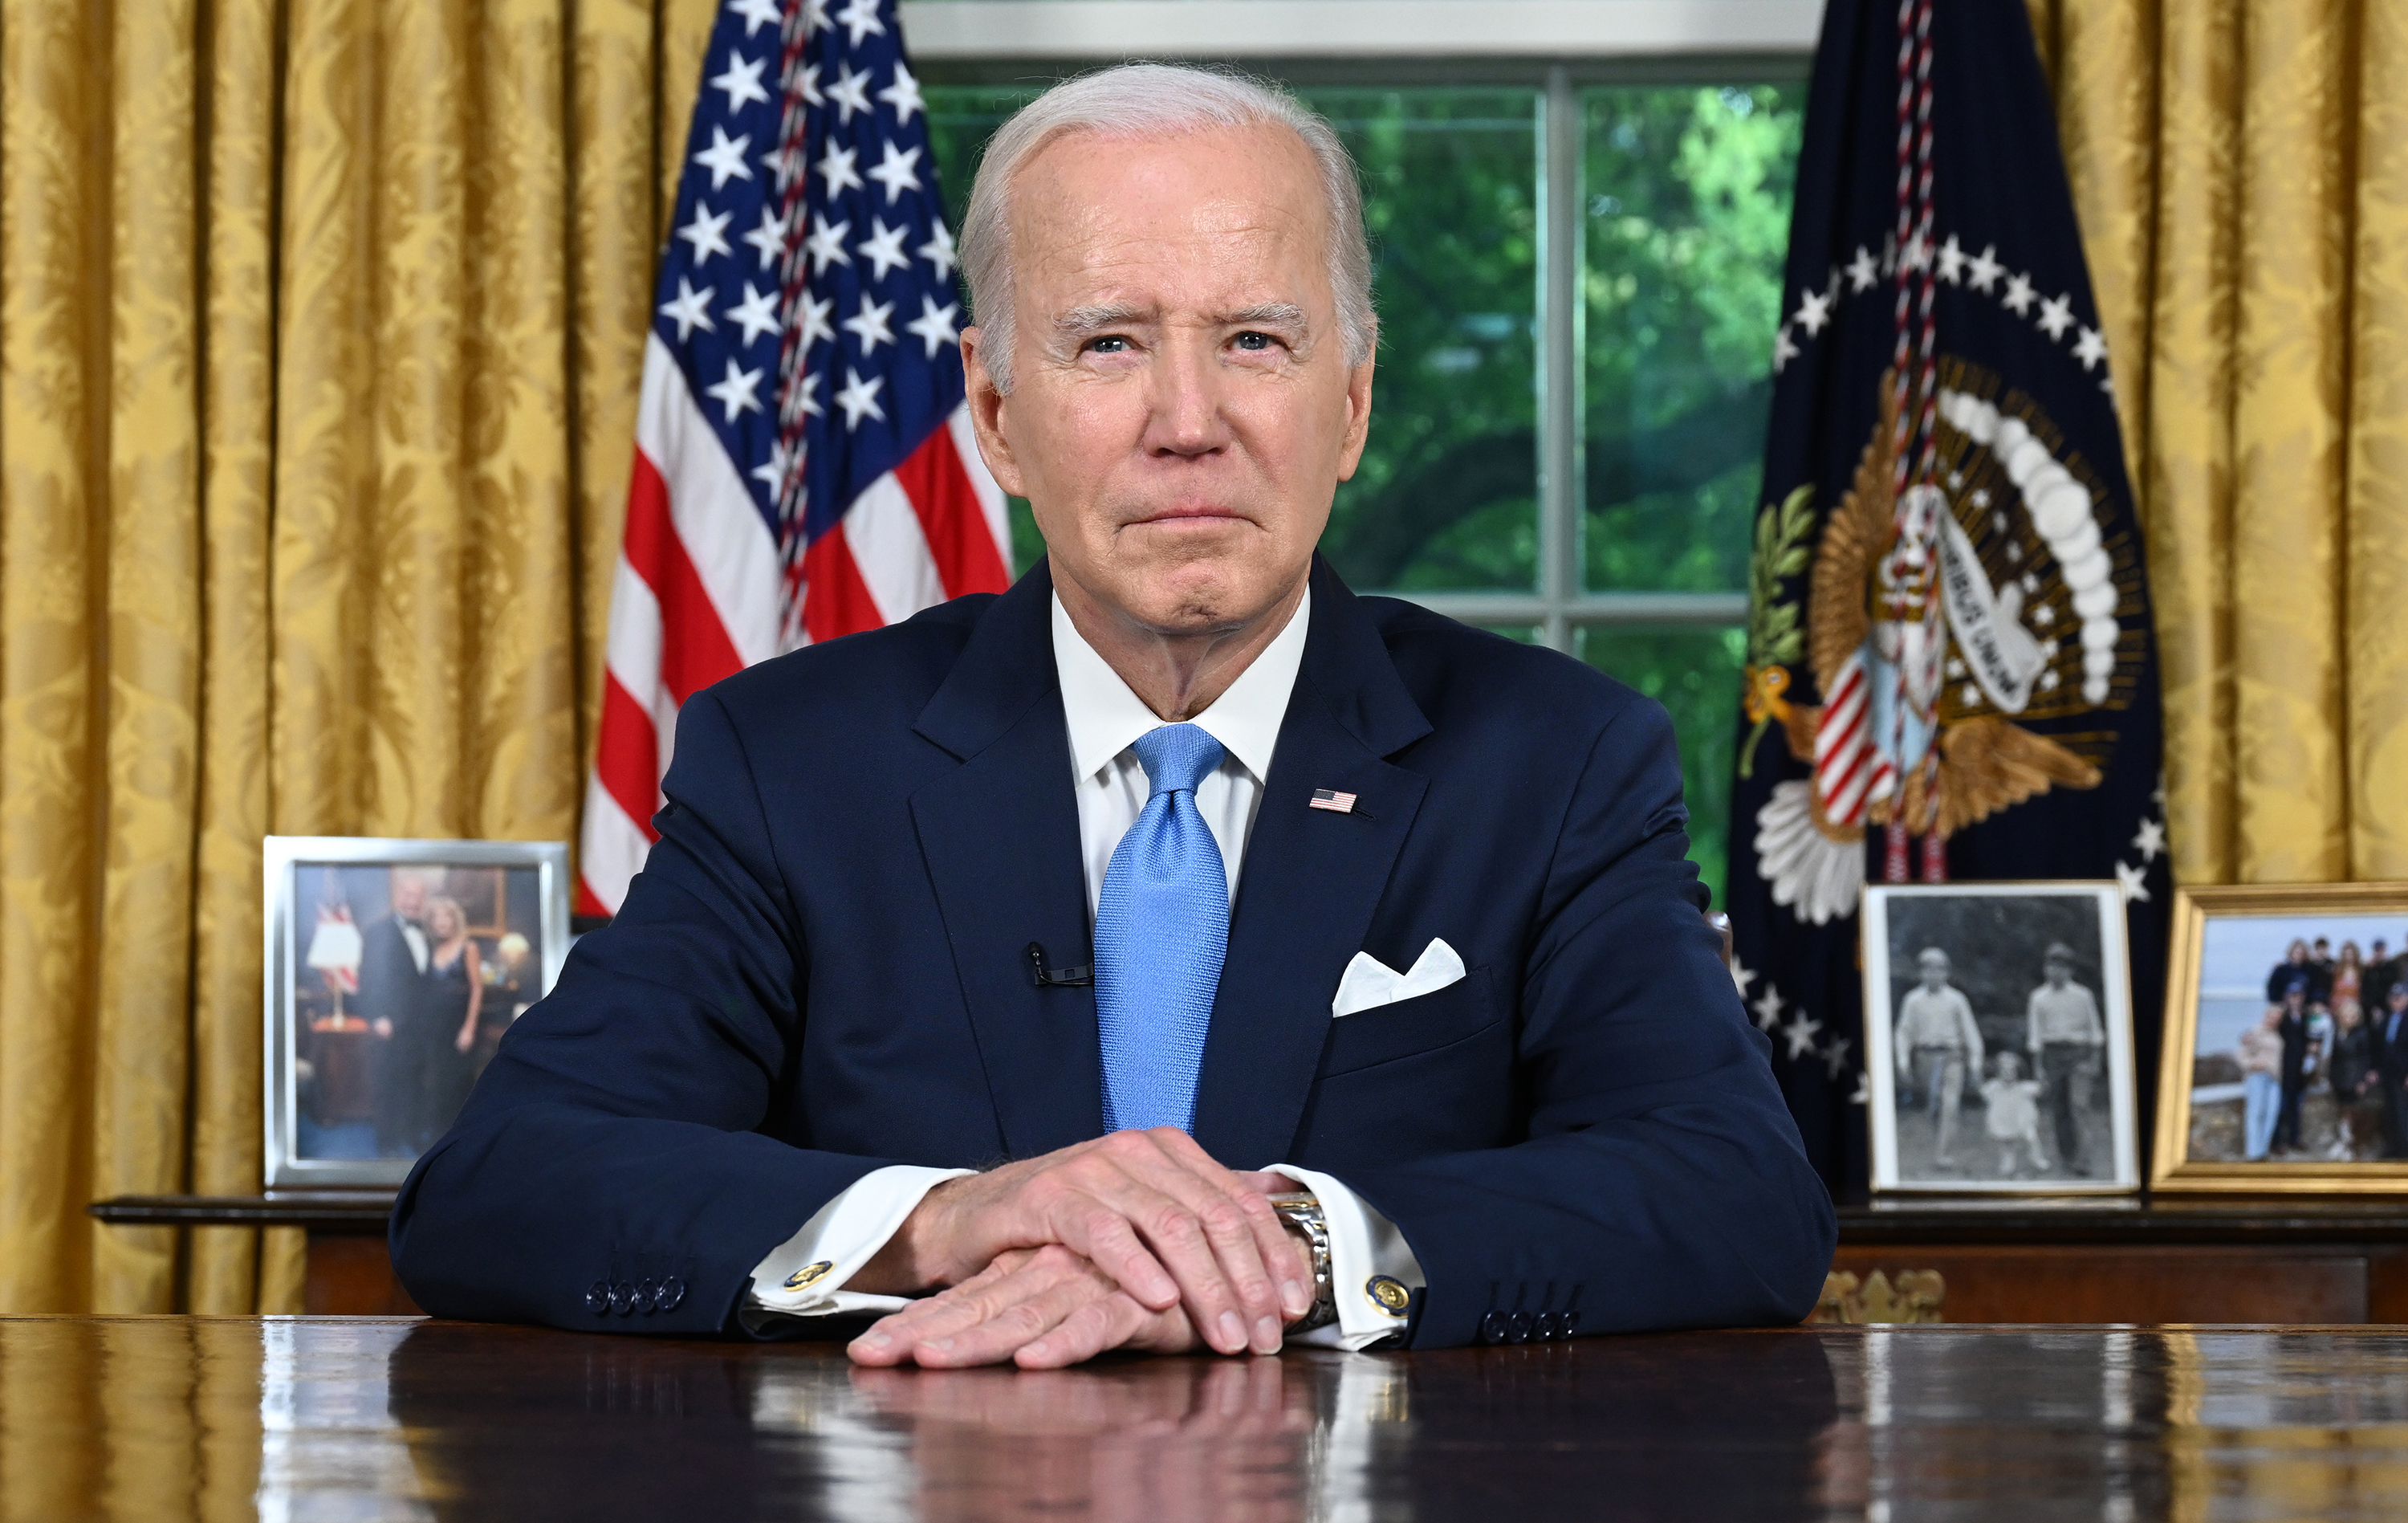 President Joe Biden during a national address in the Oval Office of the White House in Washington, DC, on June 2.